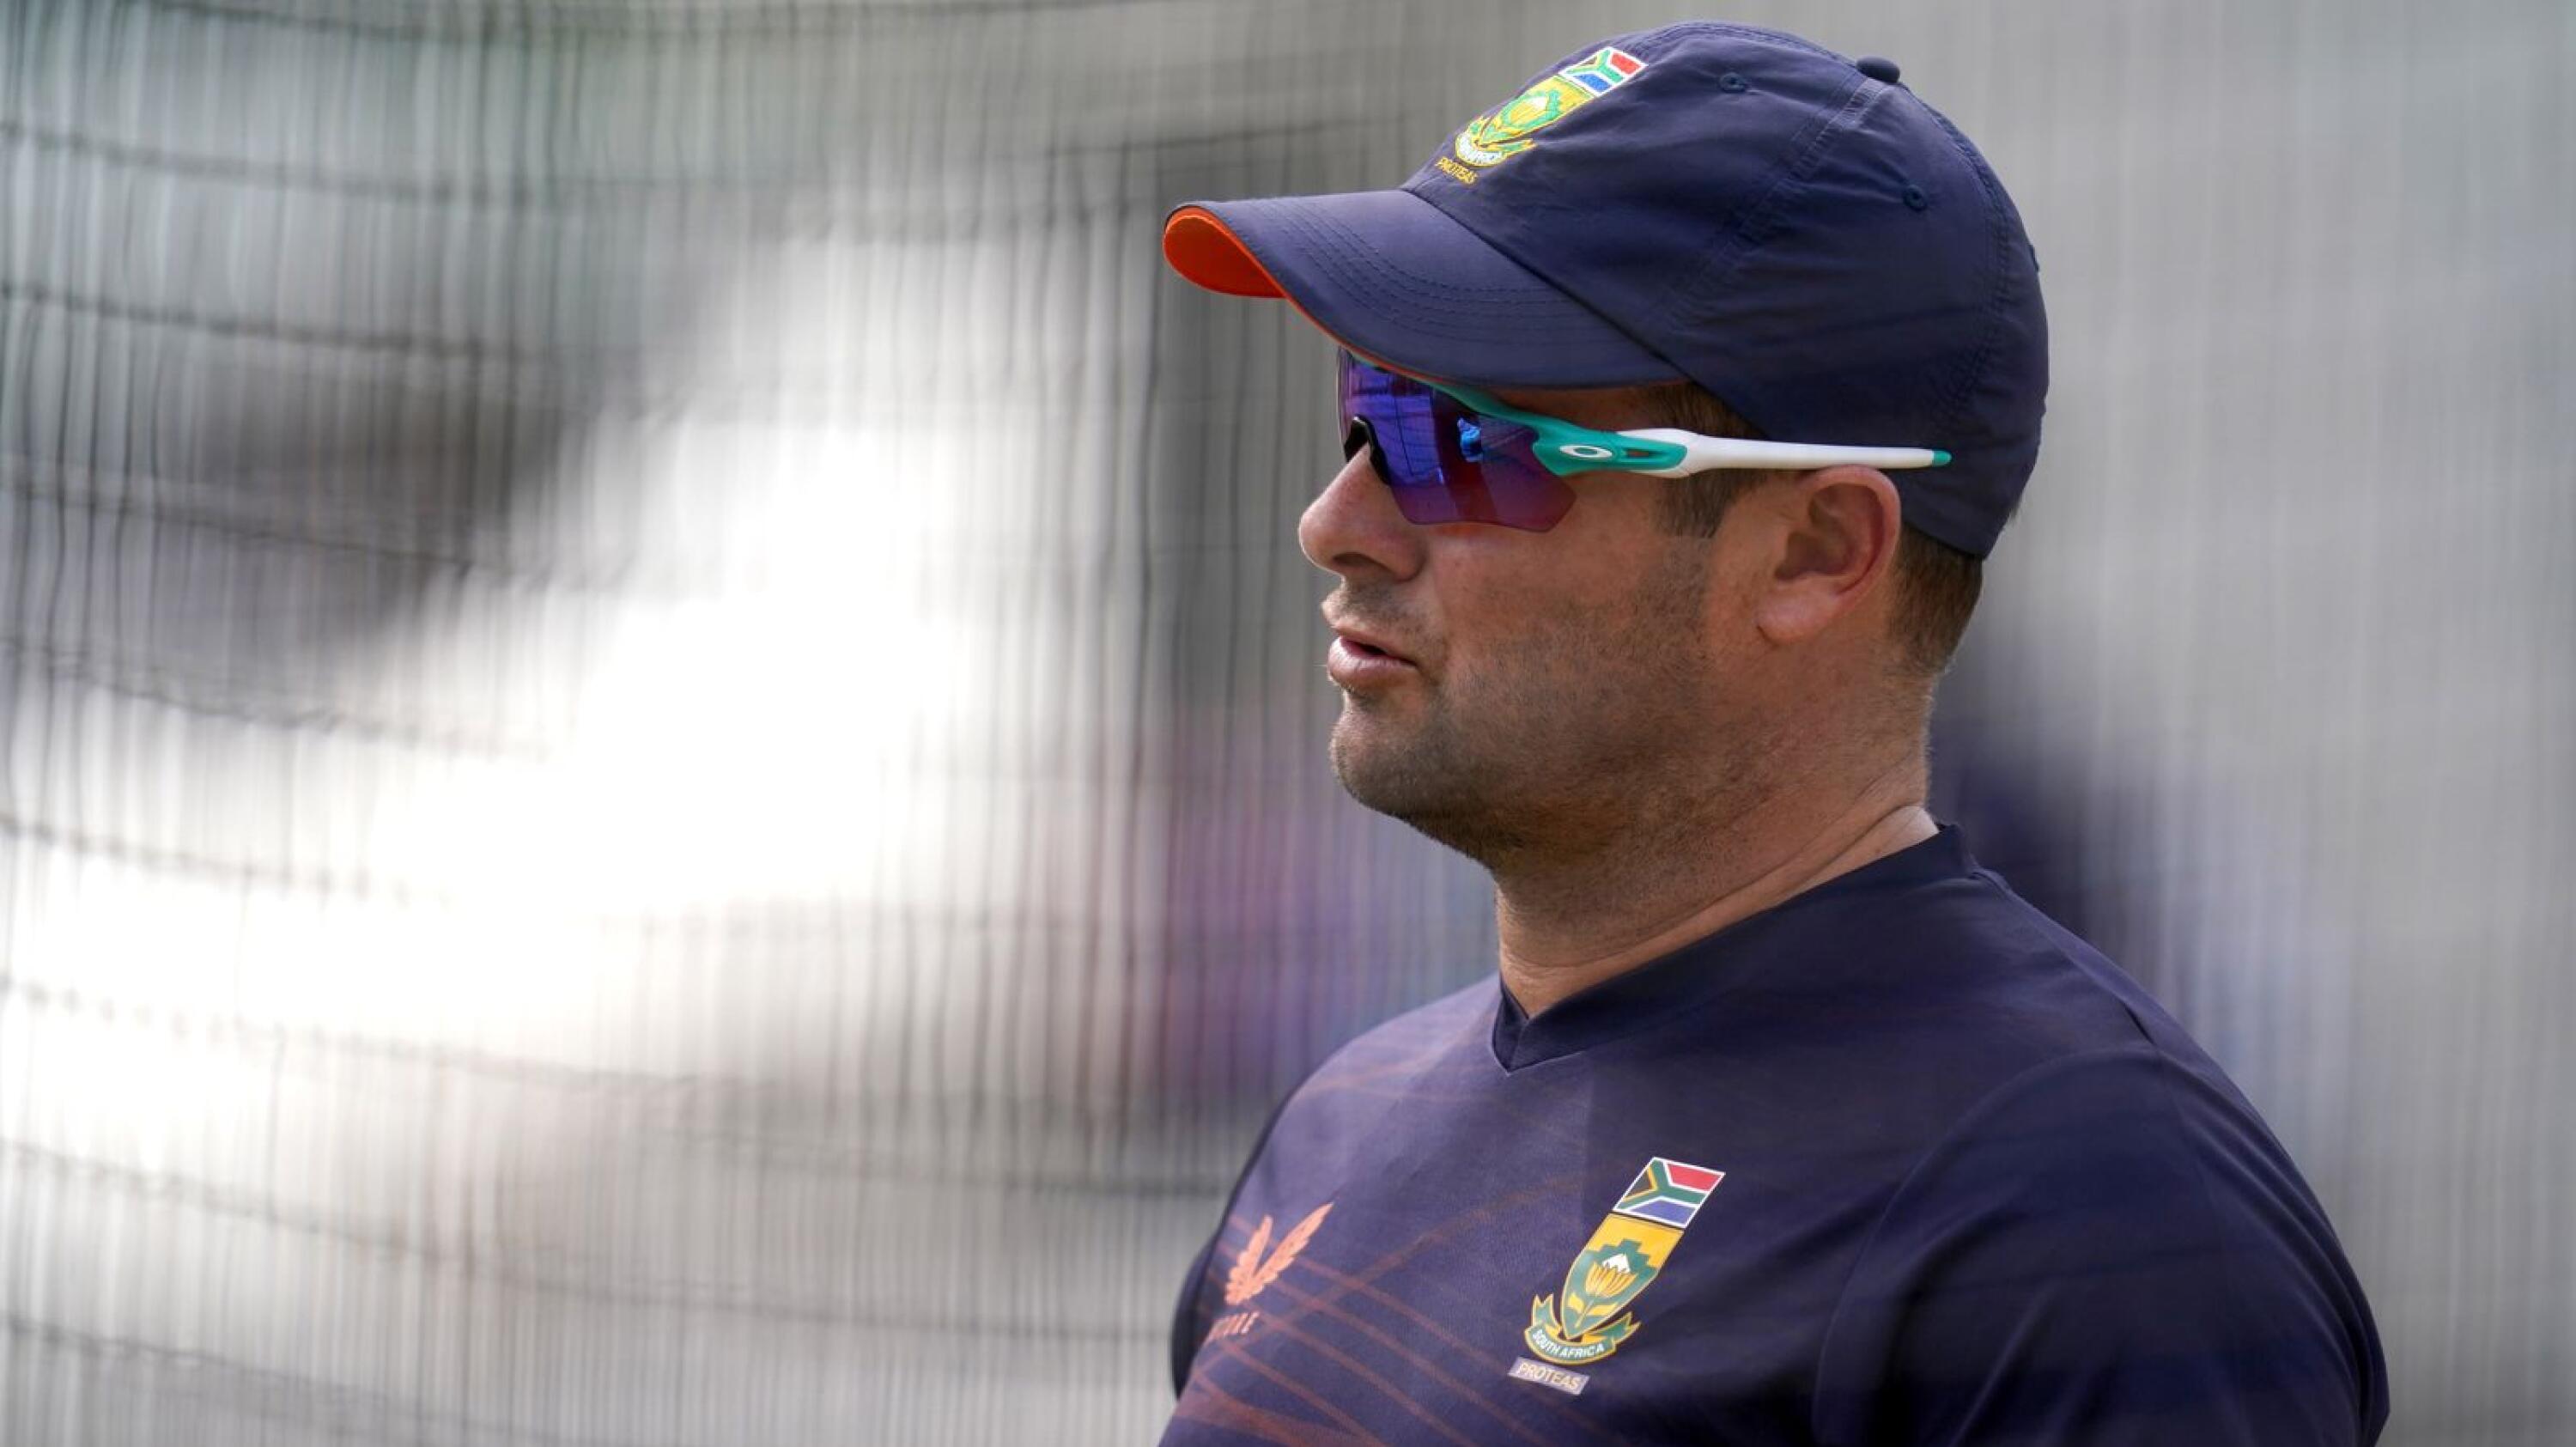 South Africa's head coach Mark Boucher during a nets session at Lord's Cricket Ground, London